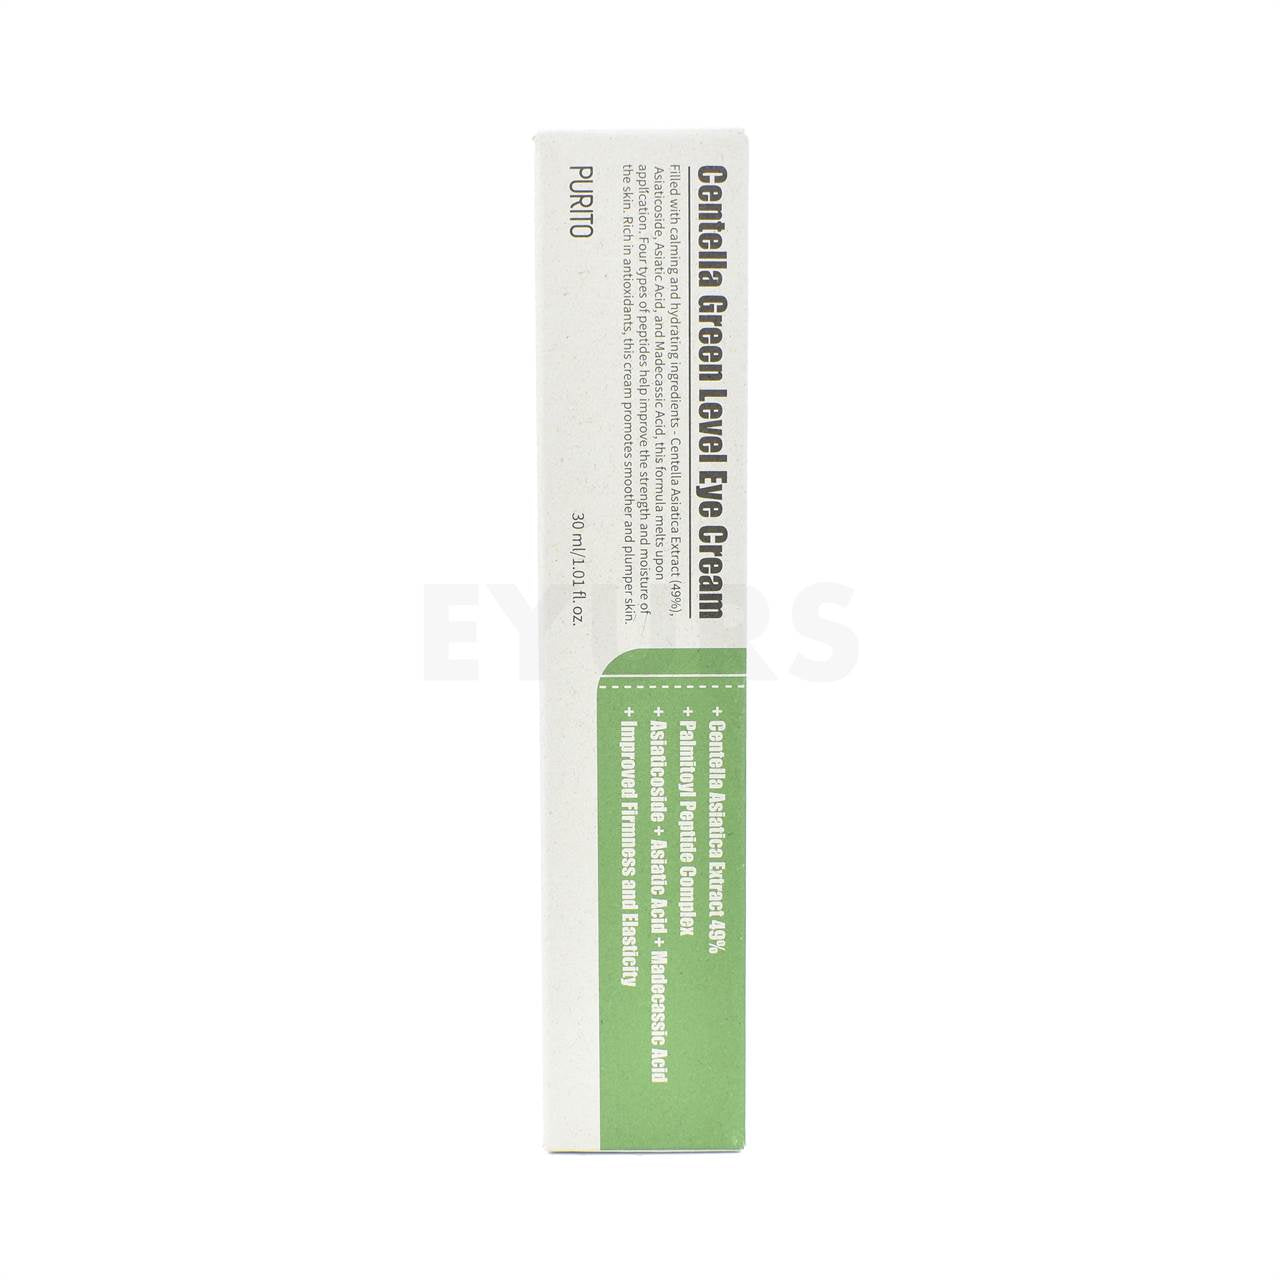 purito centella green level eye cream 30ml front side packaging